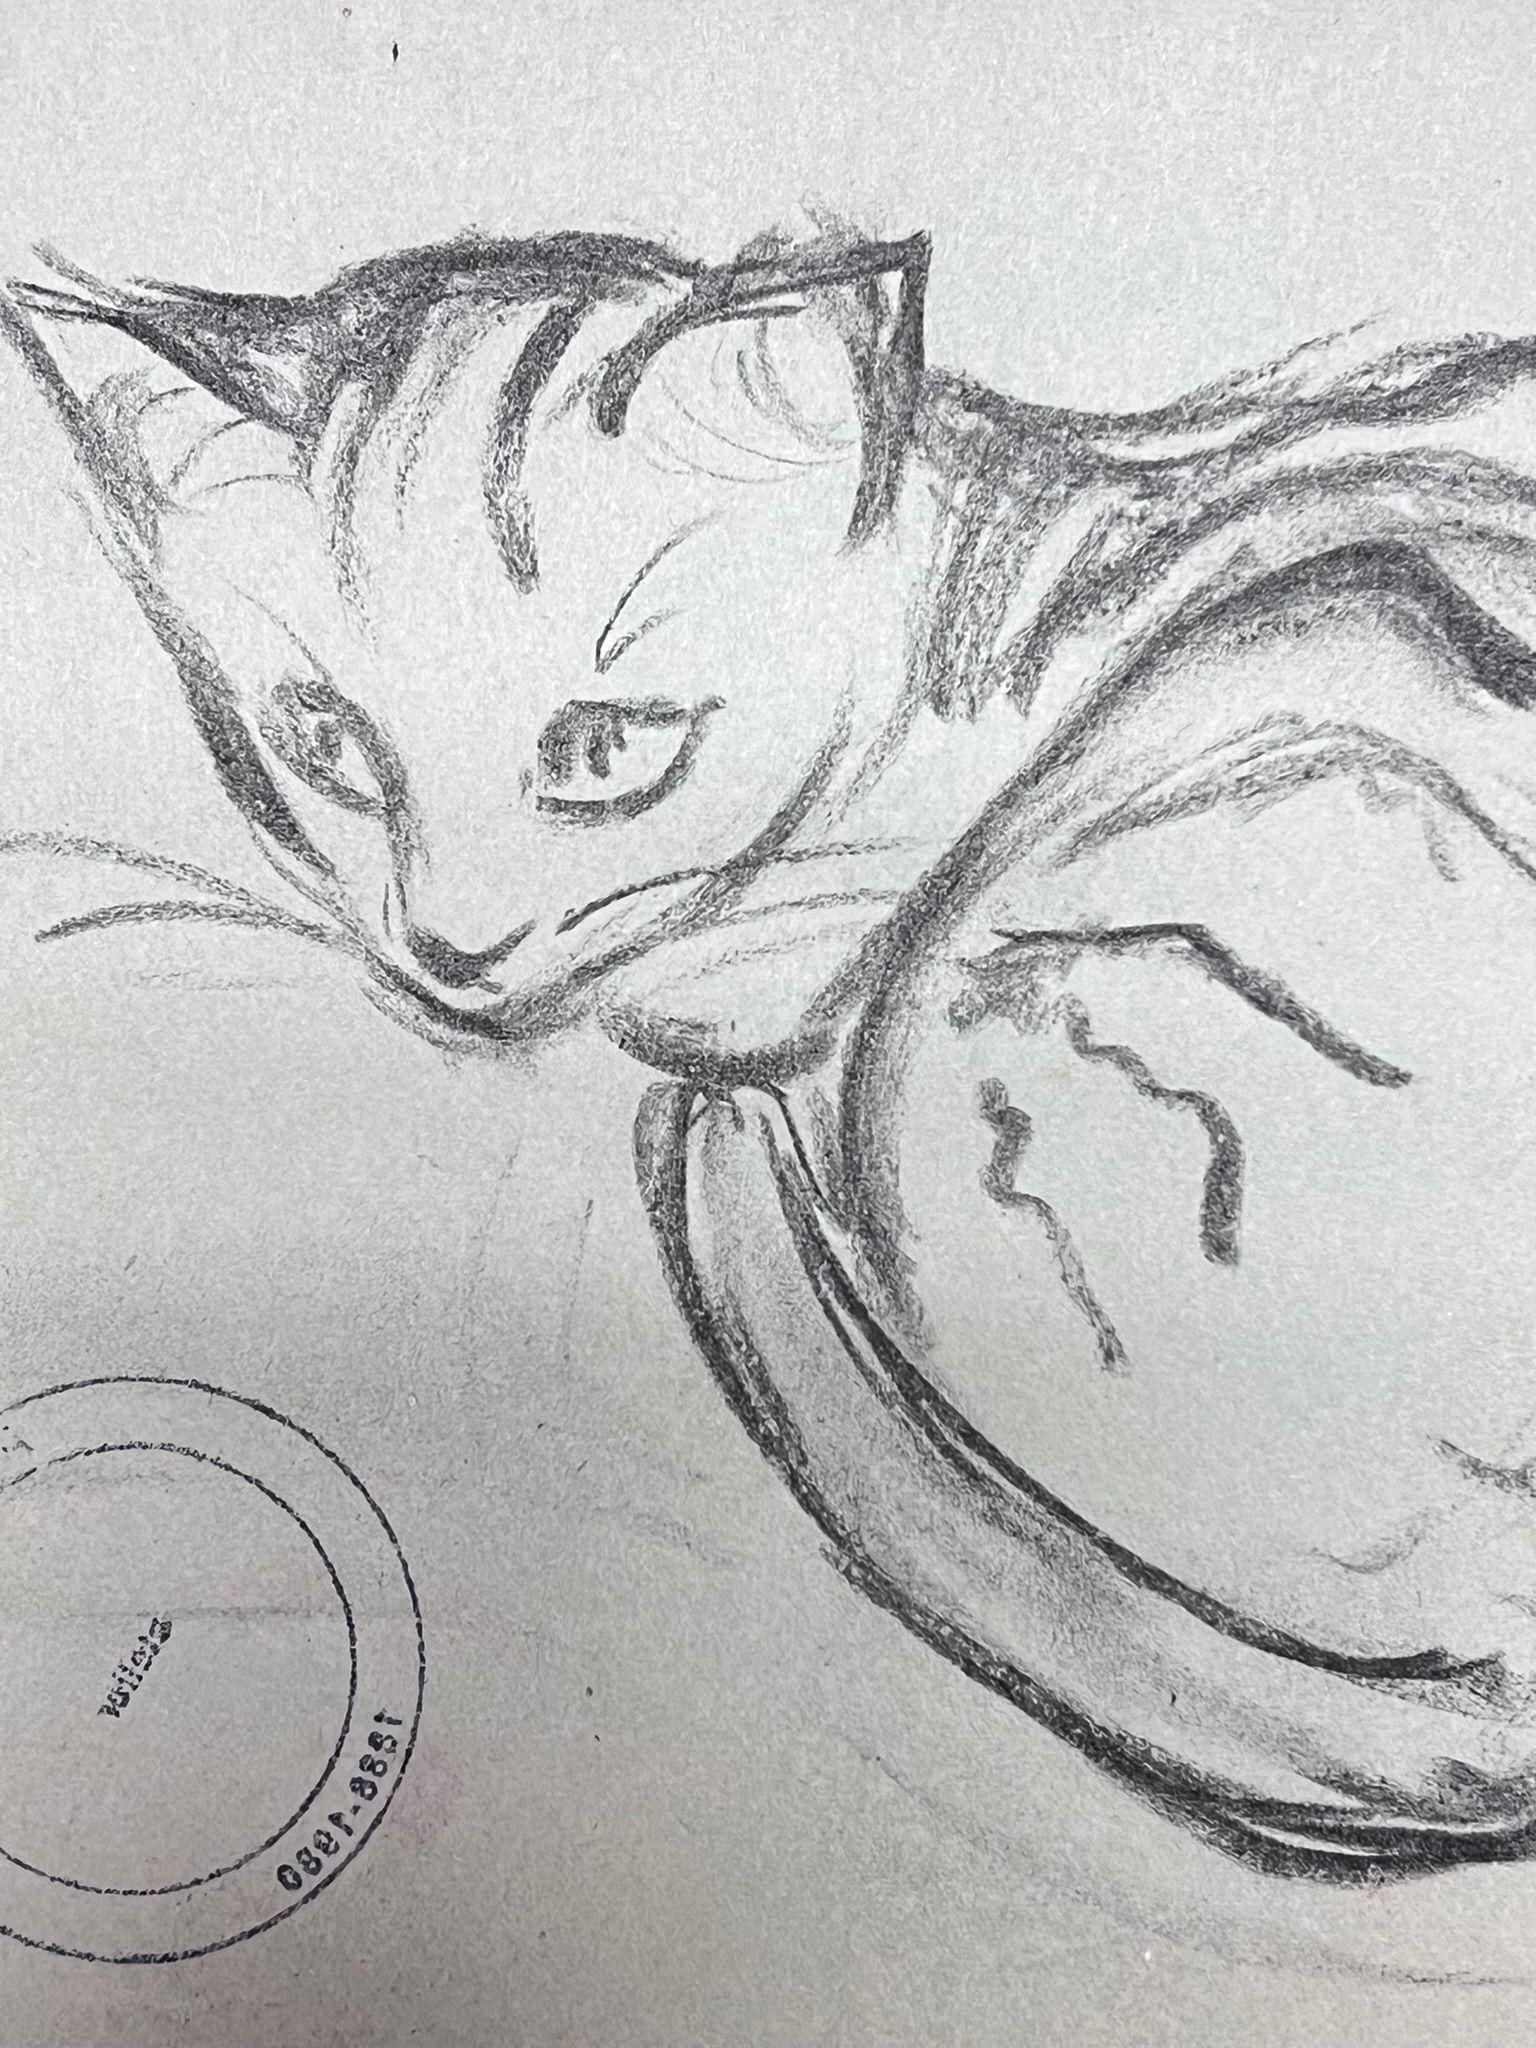 Kitten Portrait
by Louise Alix (French, 1888-1980) *see notes below
provenance stamp to the back 
pencil drawing on artist paper, unframed
measures: 6.25 high by 8 inches wide
condition: overall very good and sound, a few scuffs and marks to the